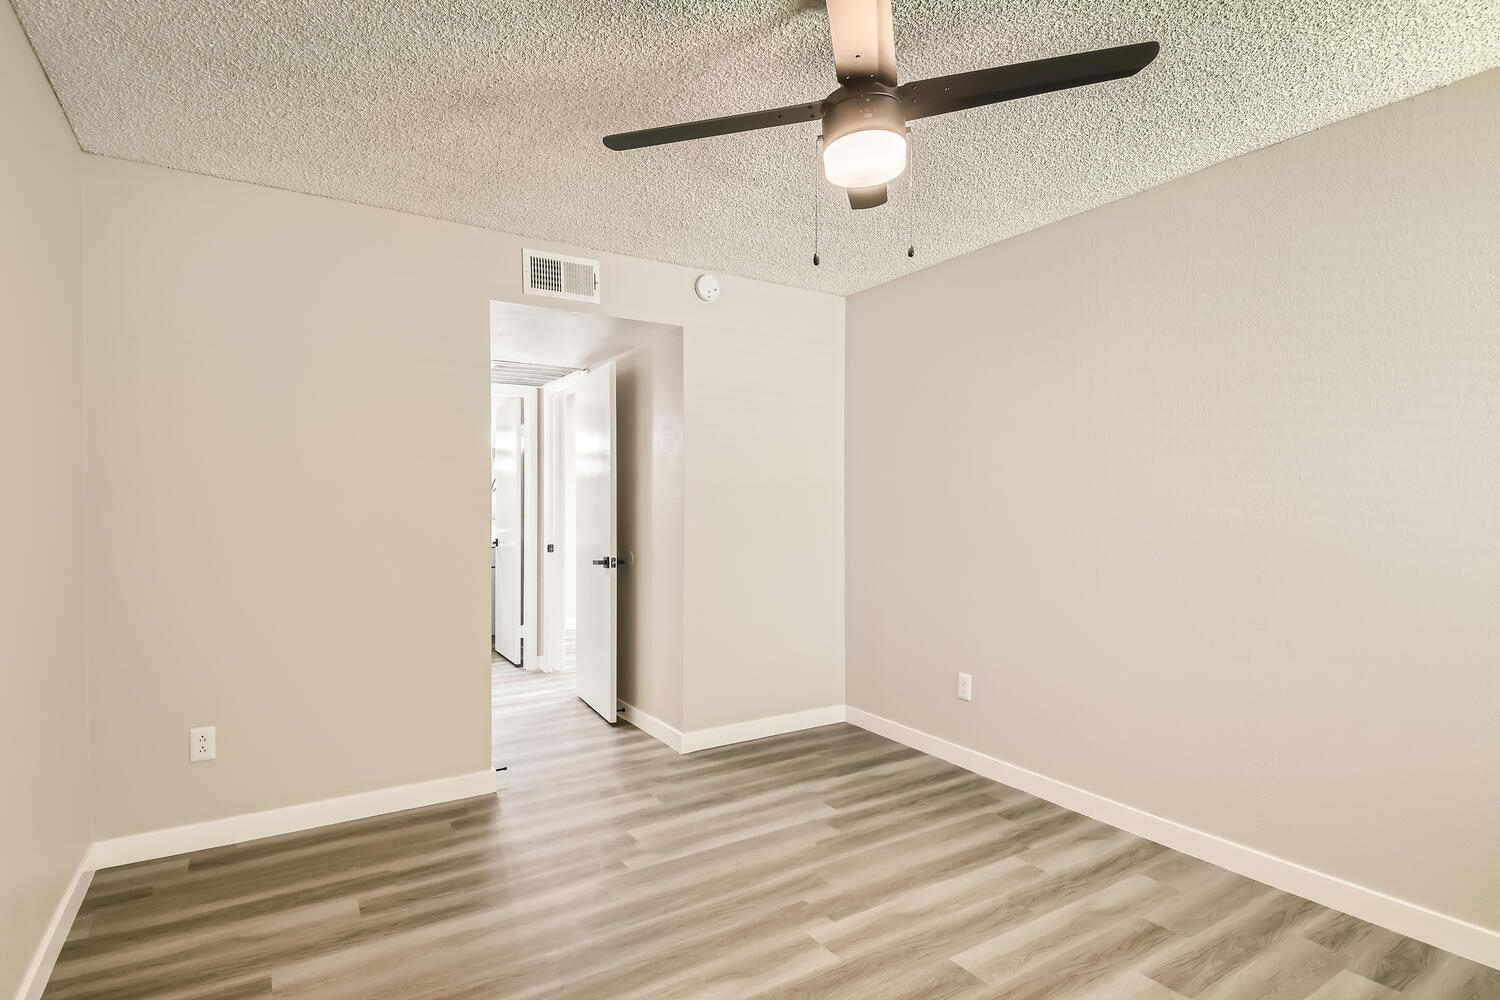 A bedroom with wood-style flooring and a ceiling fan near the kitchen at Rise on McClintock.